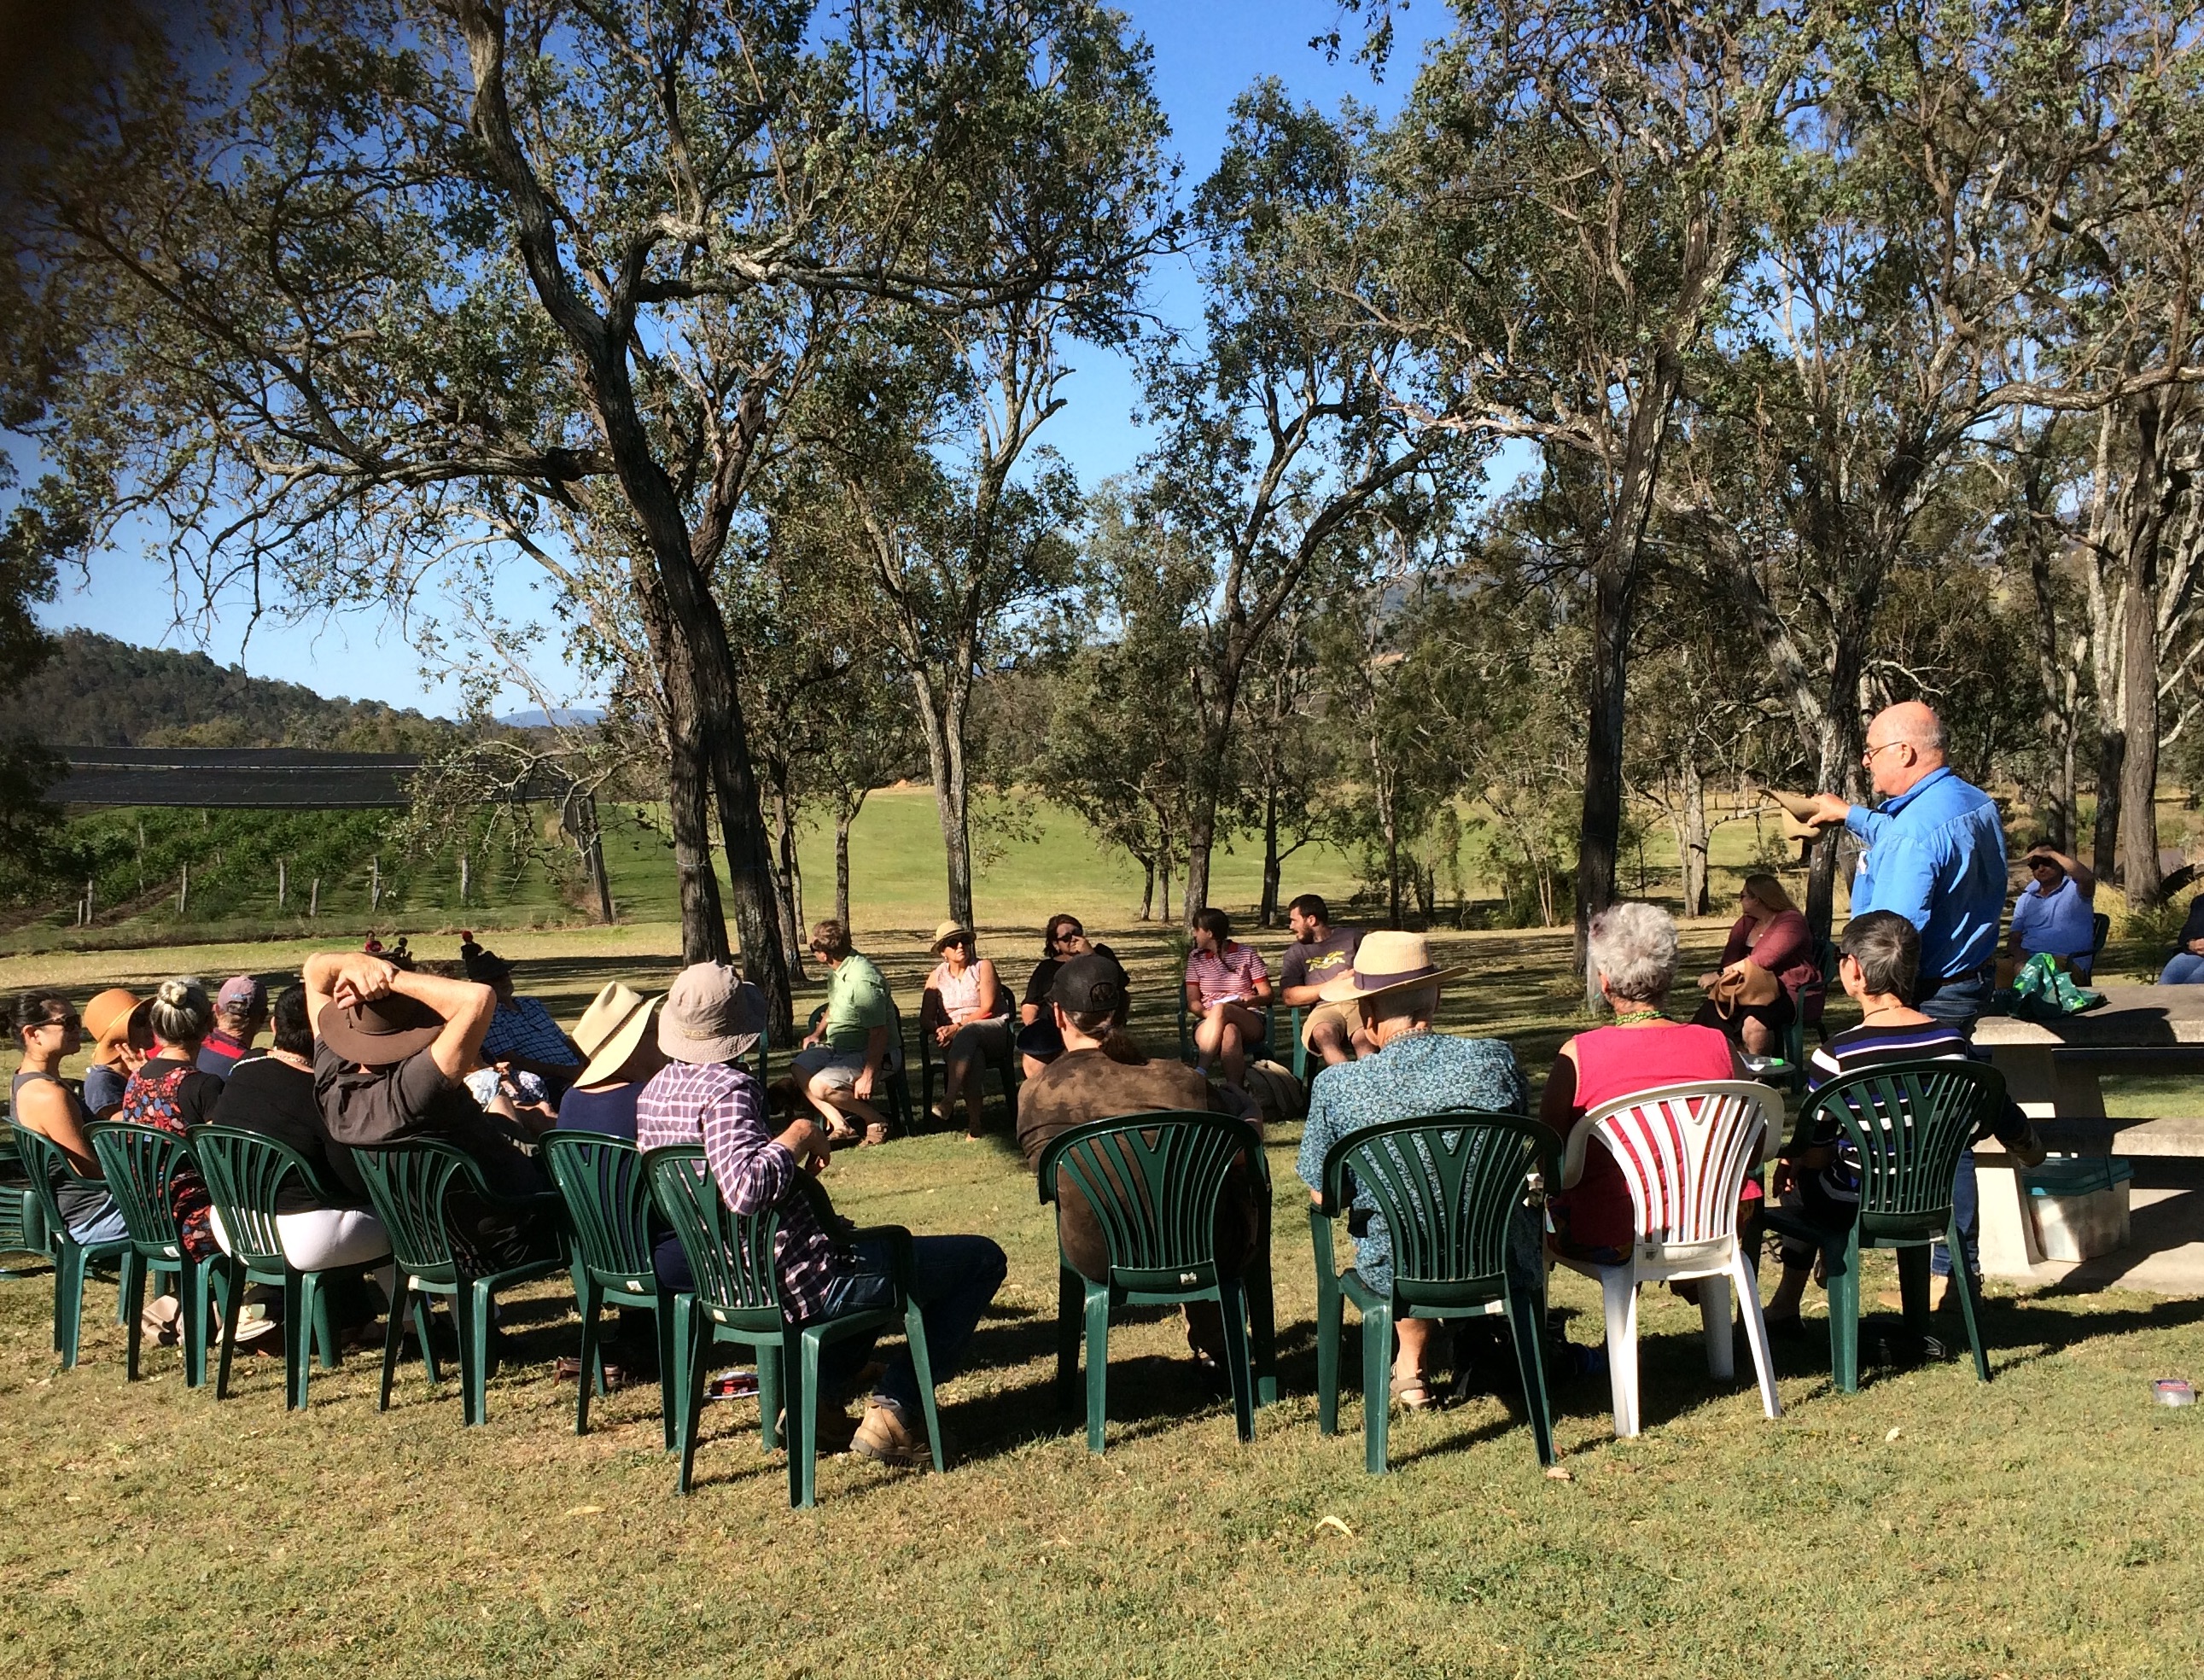 David McMaugh, vineyard developer and owner, addressing our delegates about the environmental aspects of his property